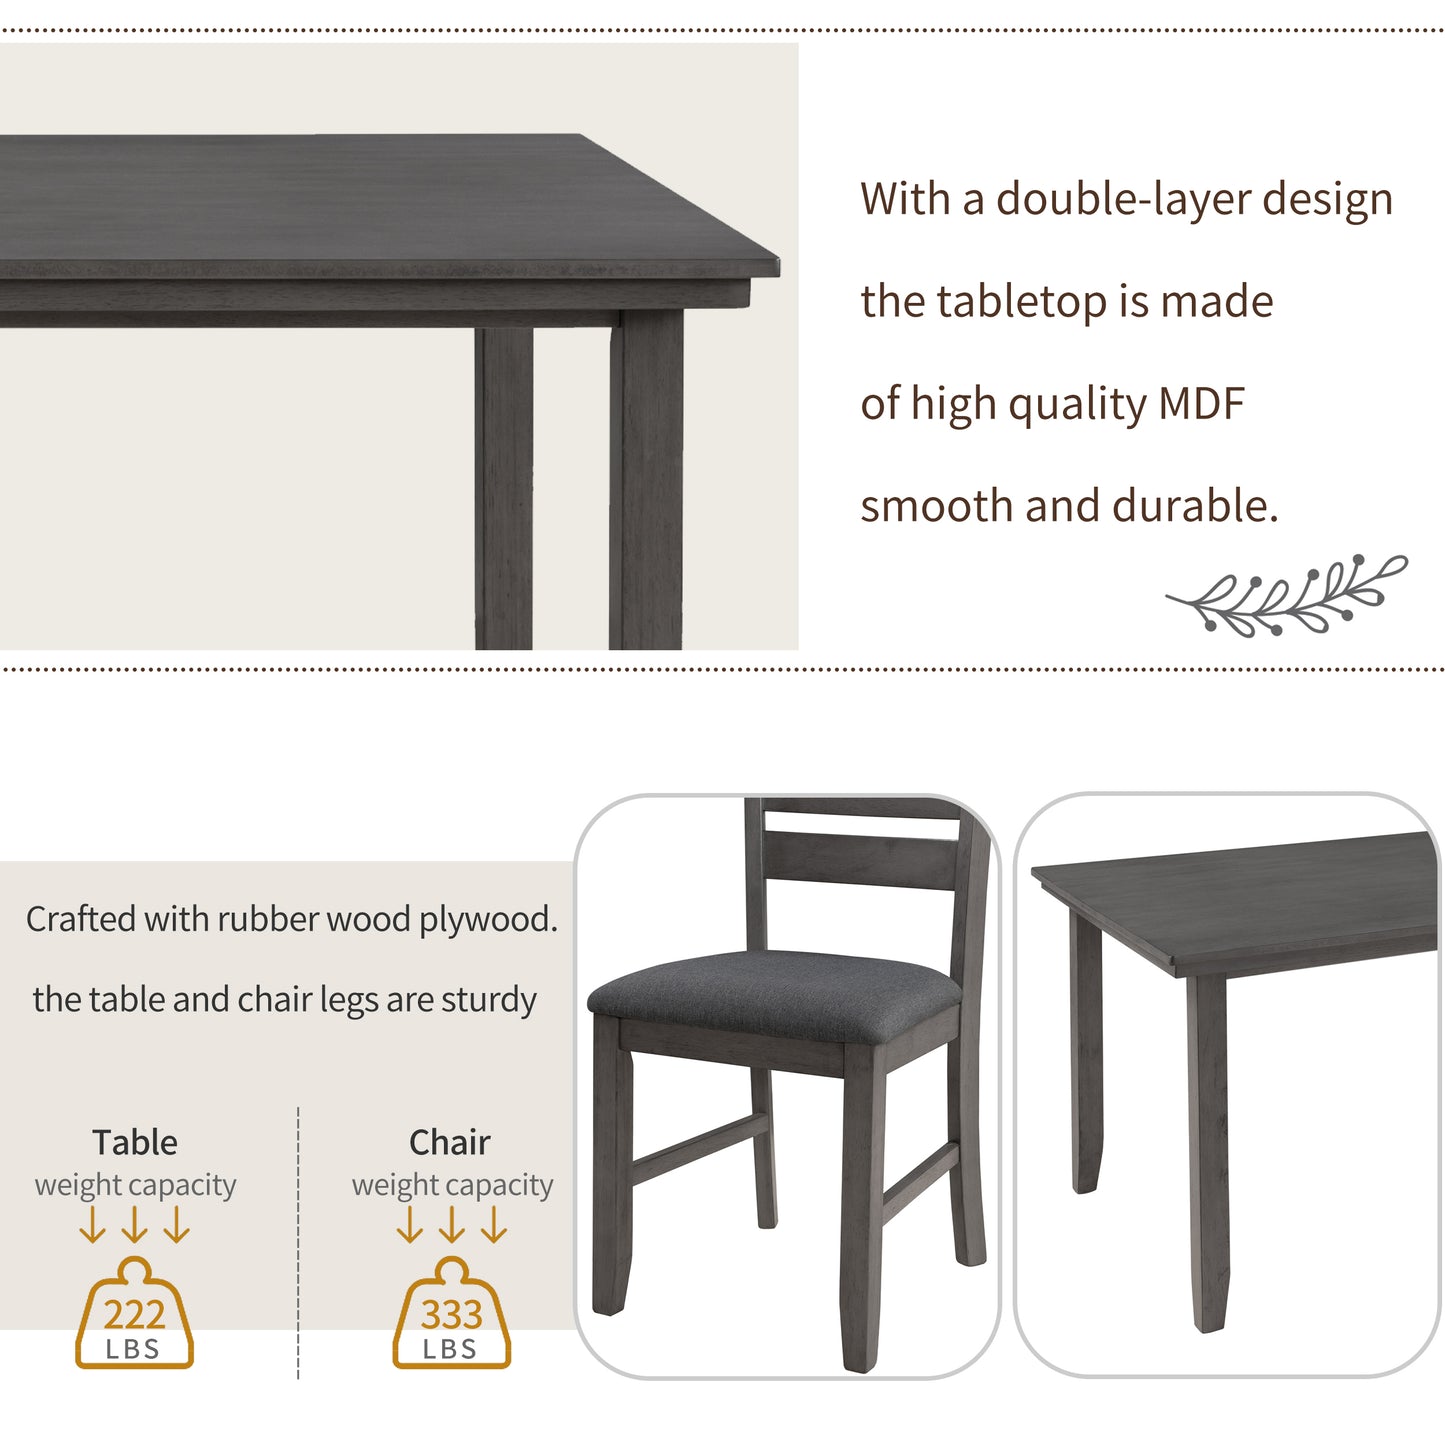 Luis 6-Piece Dining Table